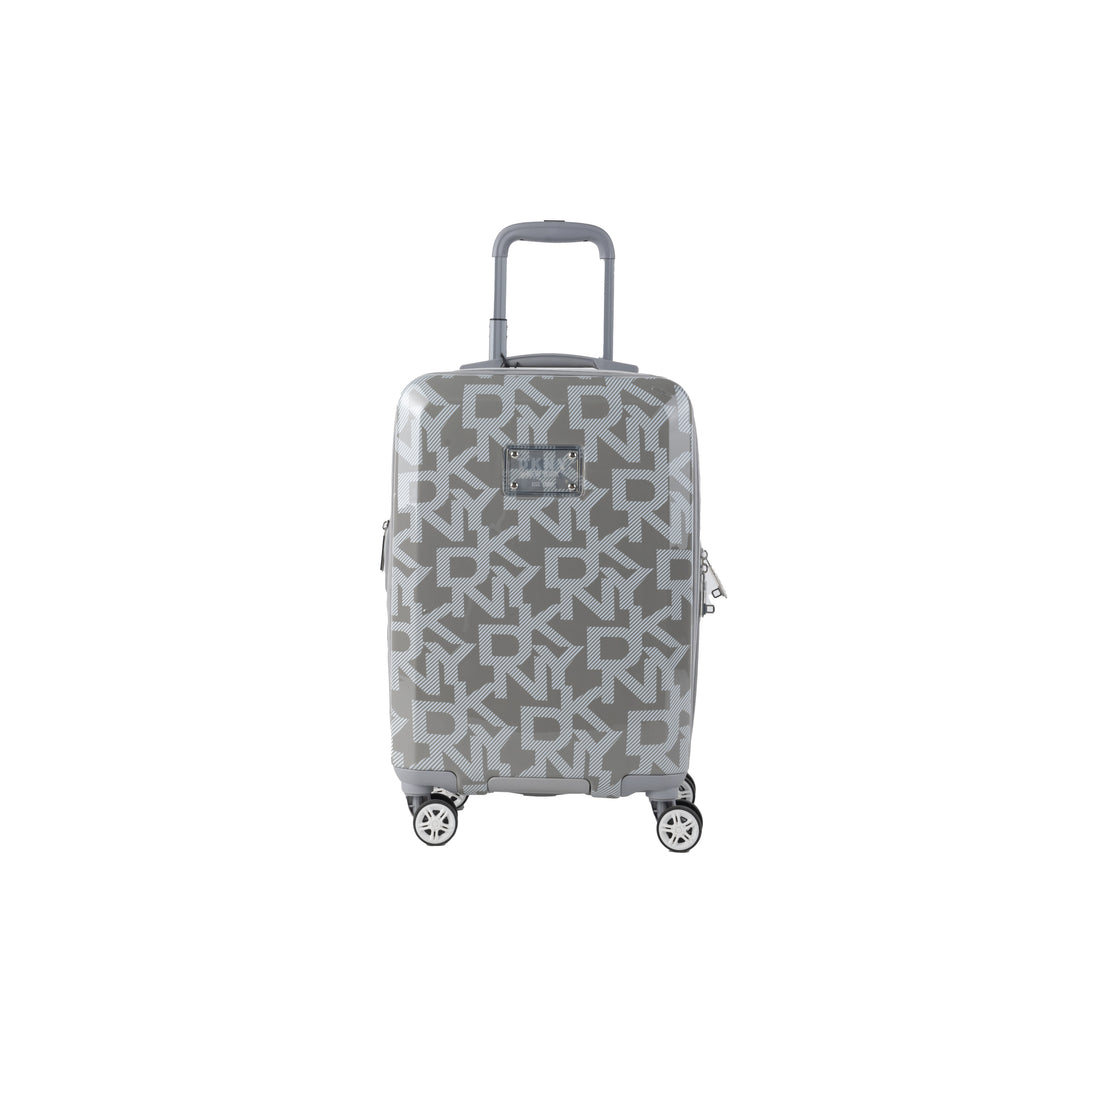 DKNY Multi-Color Cabin Luggage